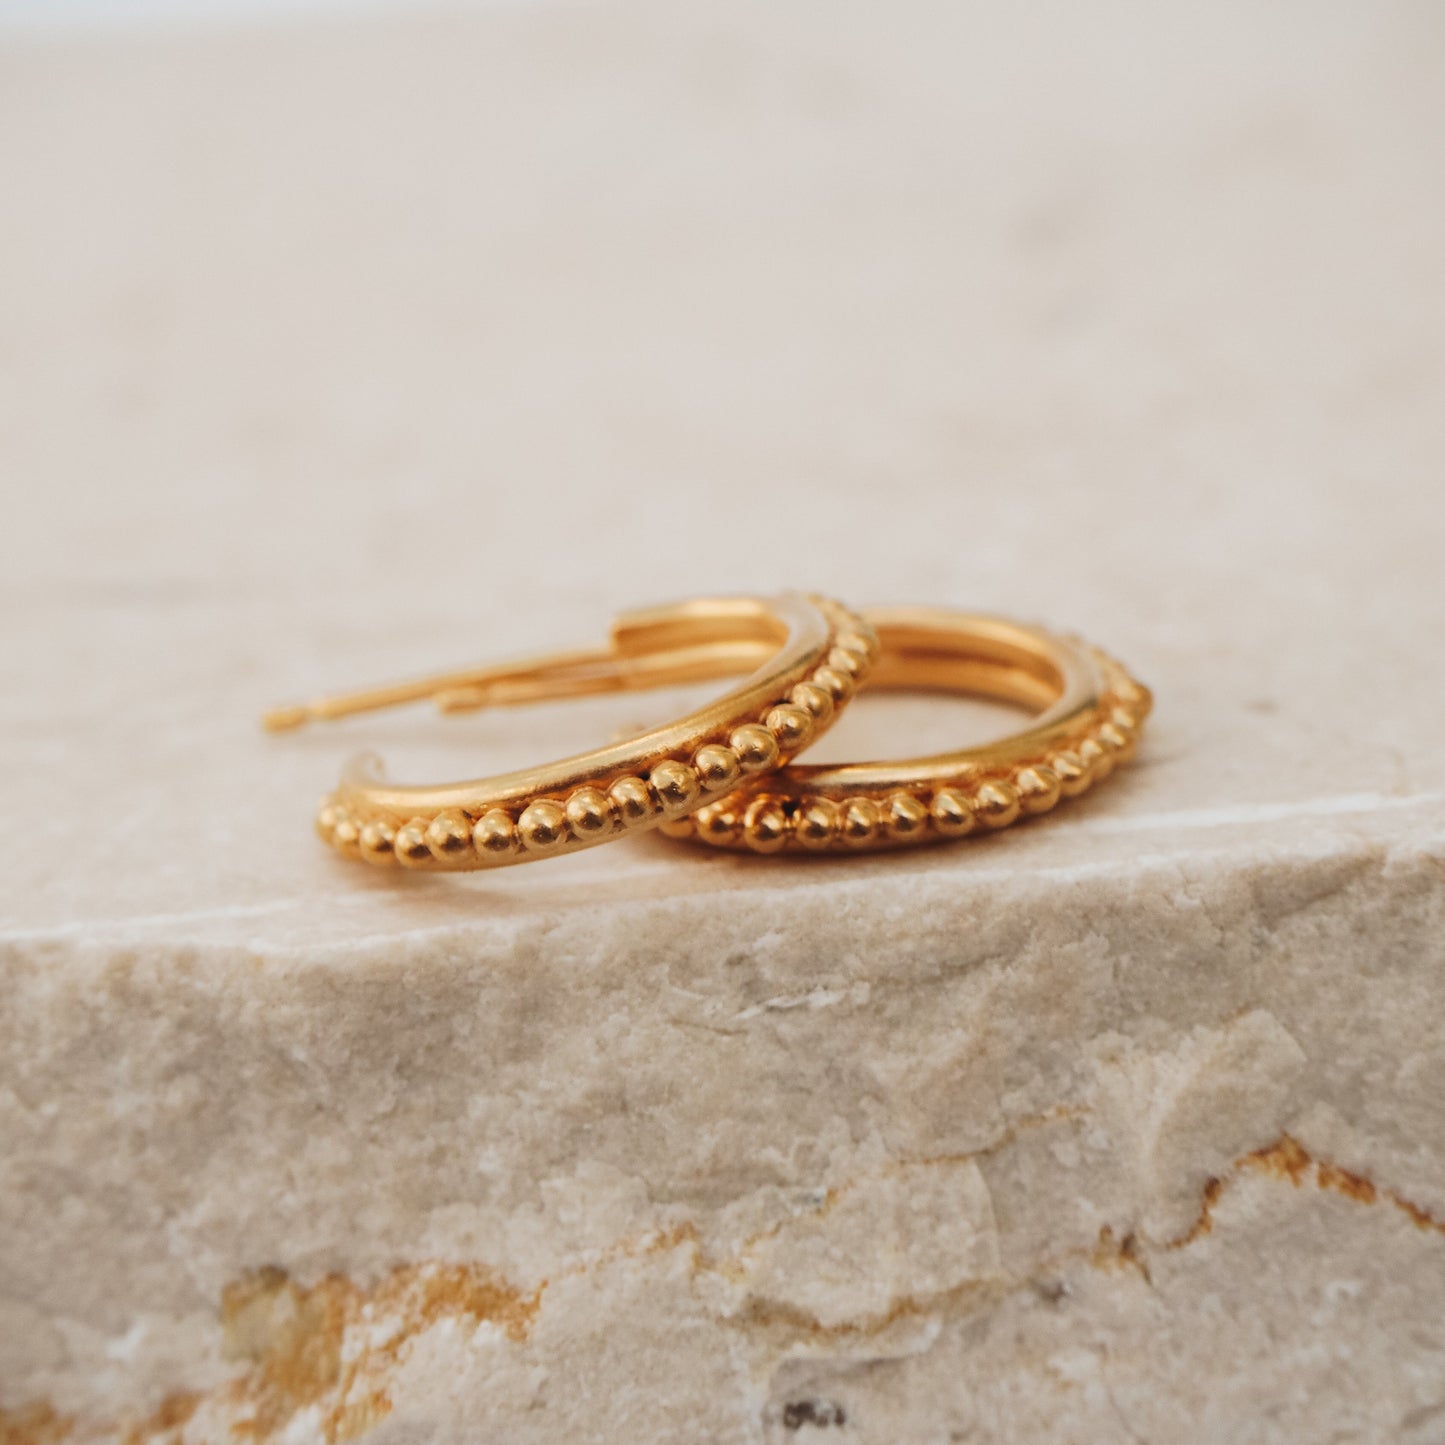 Ancient-inspired gold stud hoop earrings showcasing intricate granulation work for a unique aesthetic.